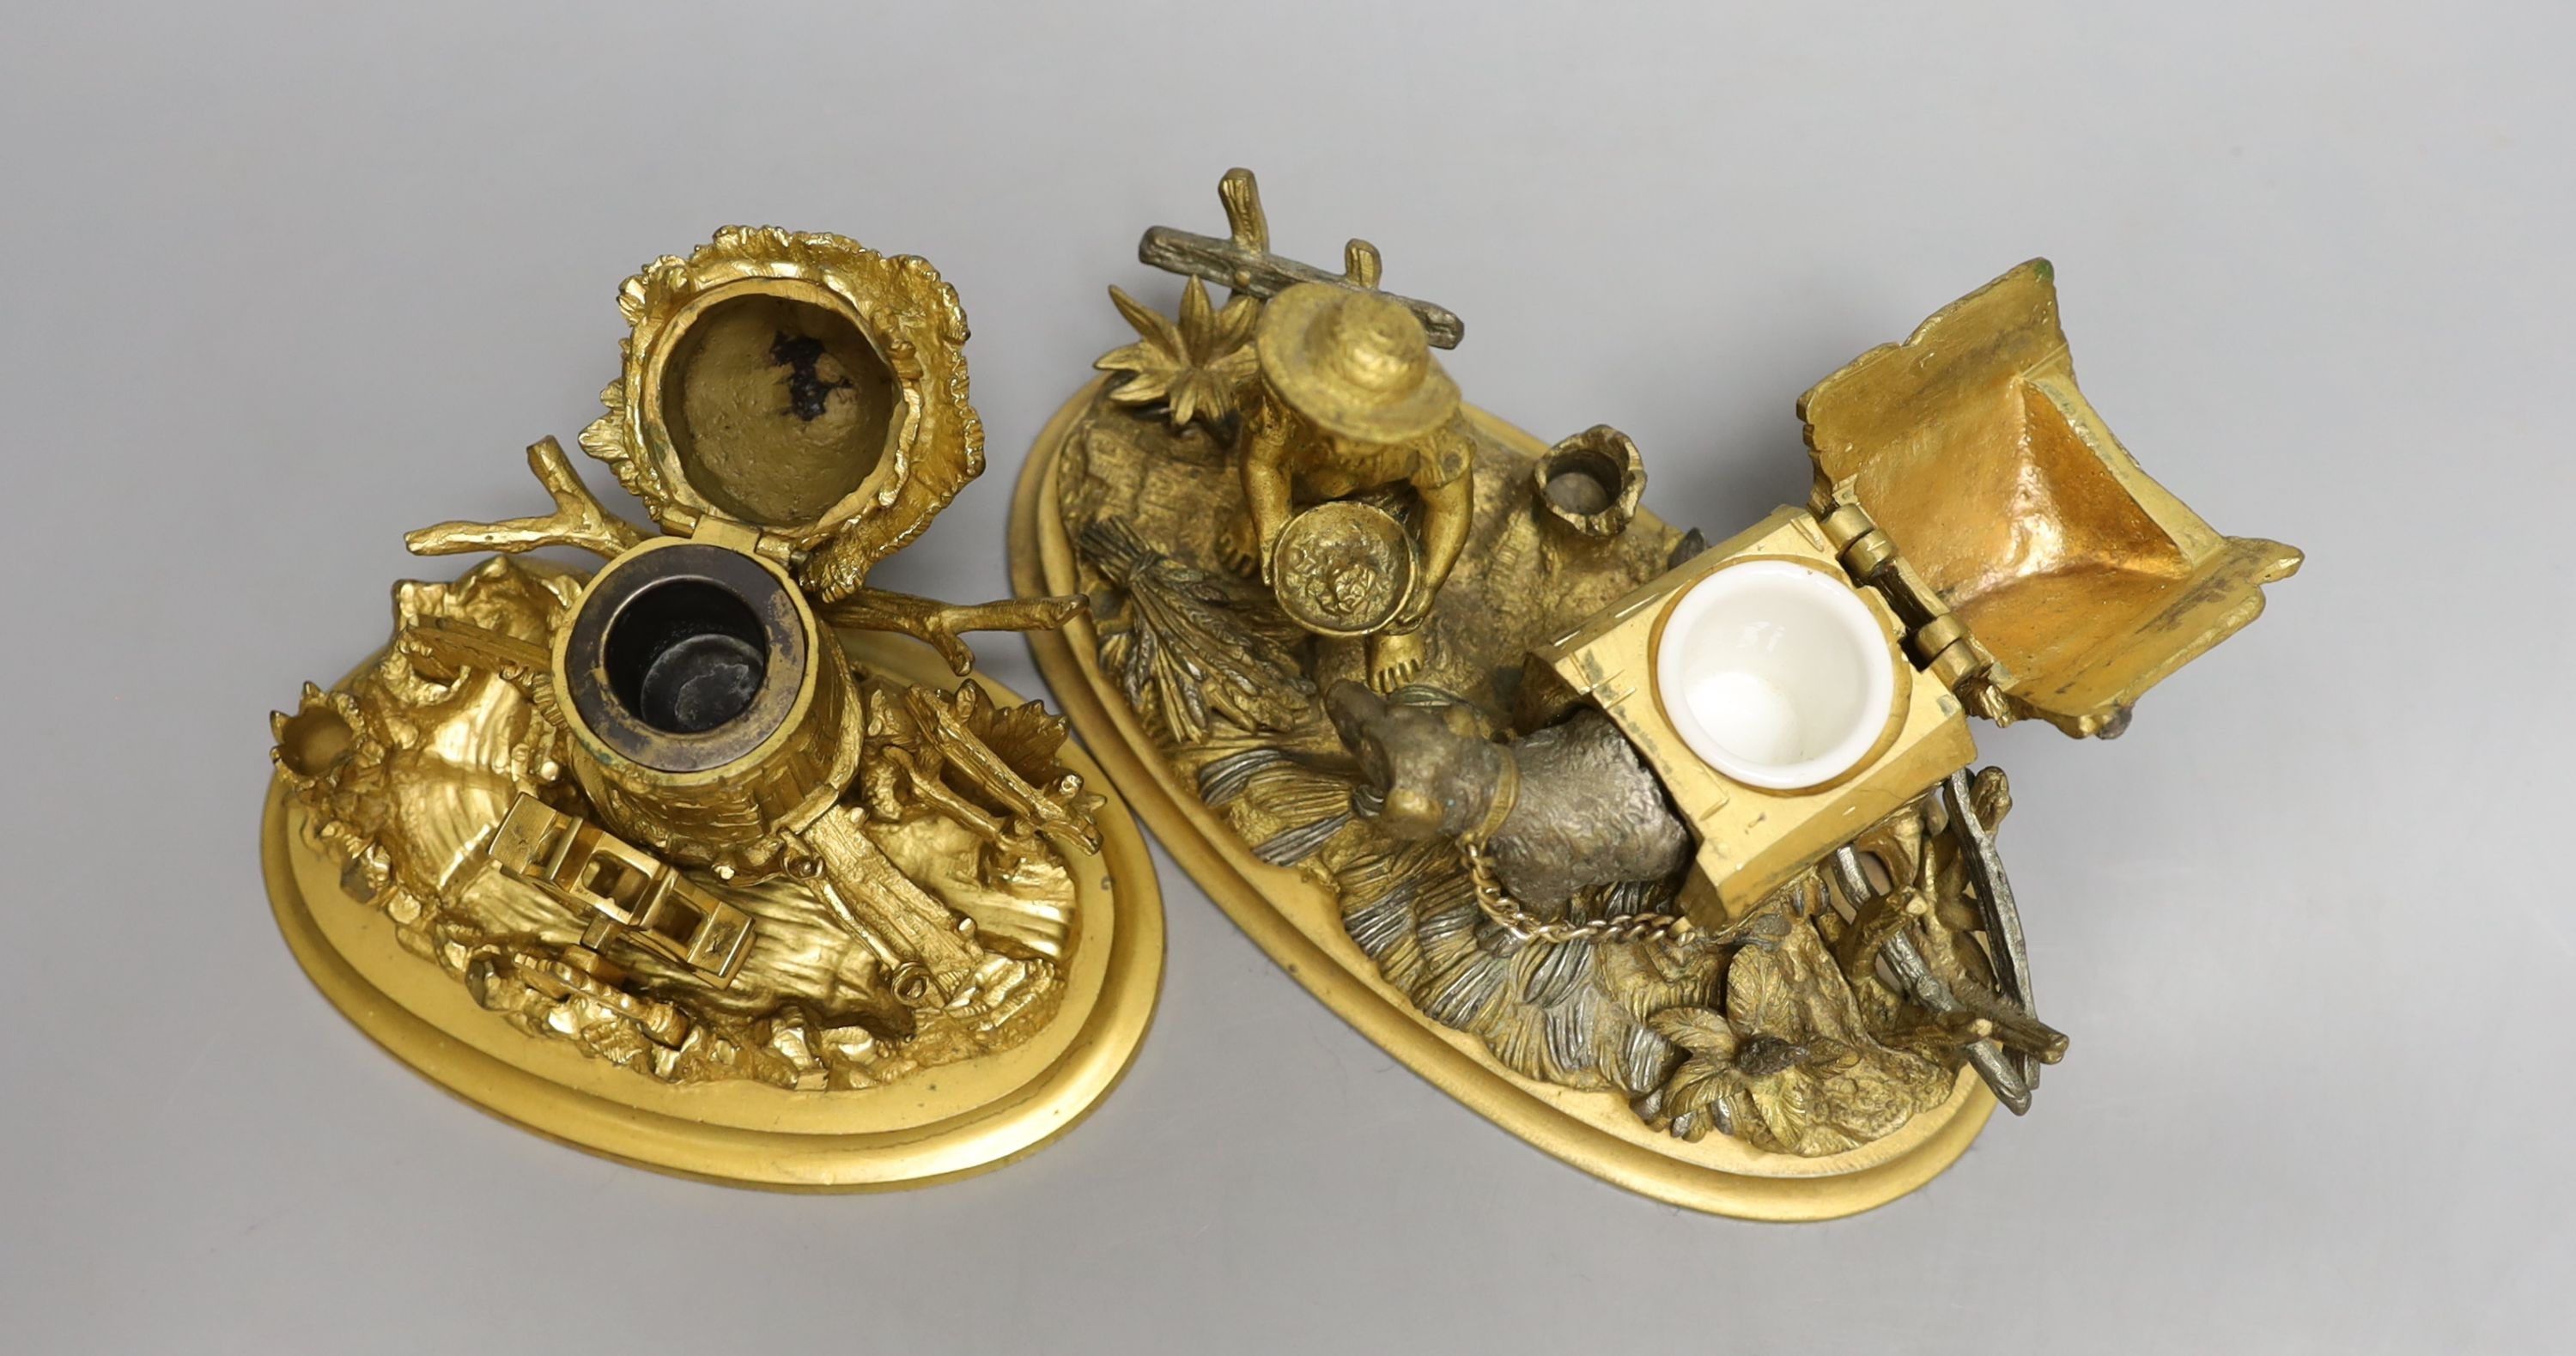 Two ormolu inkwells modelled as a dog in a kennel and a water mill - Image 3 of 3